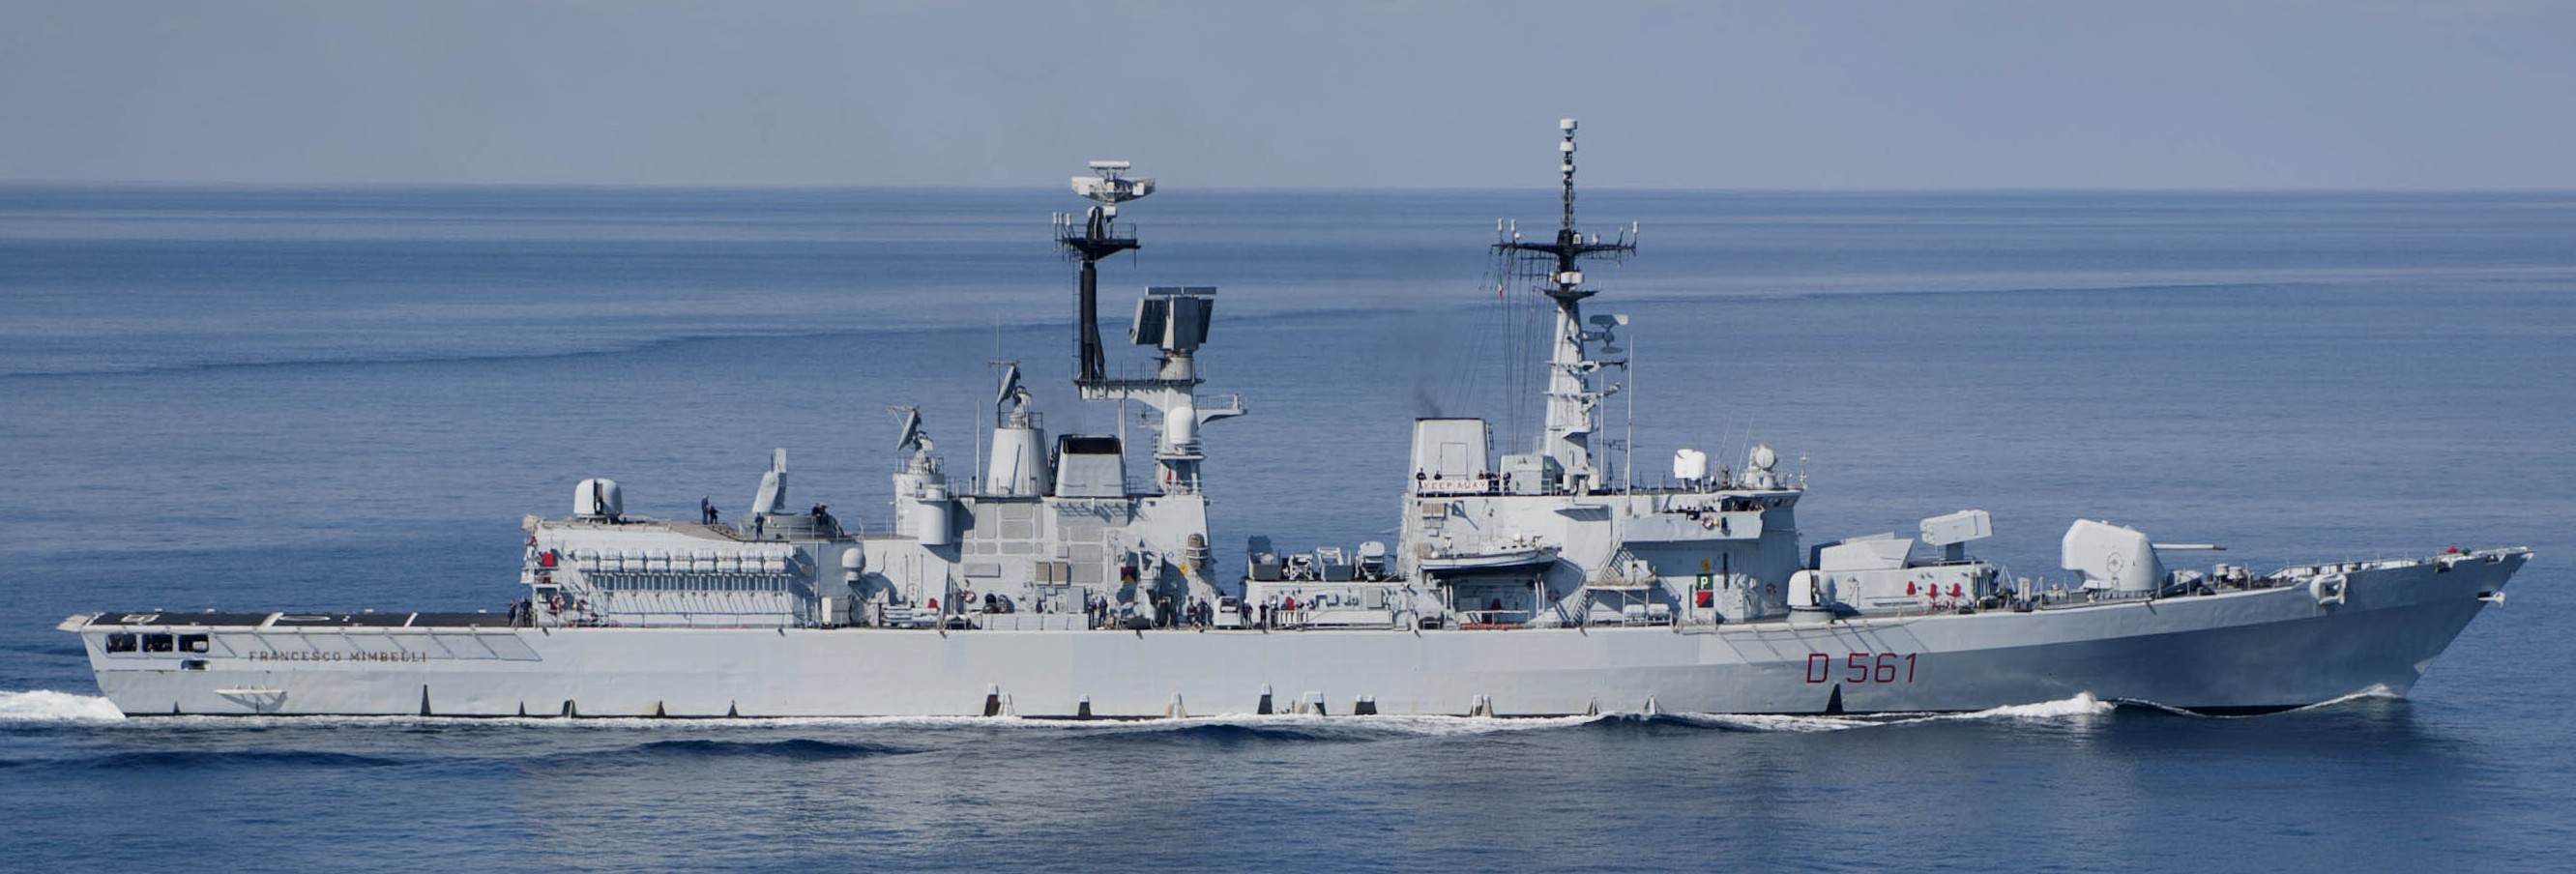 d-561 francesco mimbelli its nave guided missile destroyer ddg italian navy marina militare 04